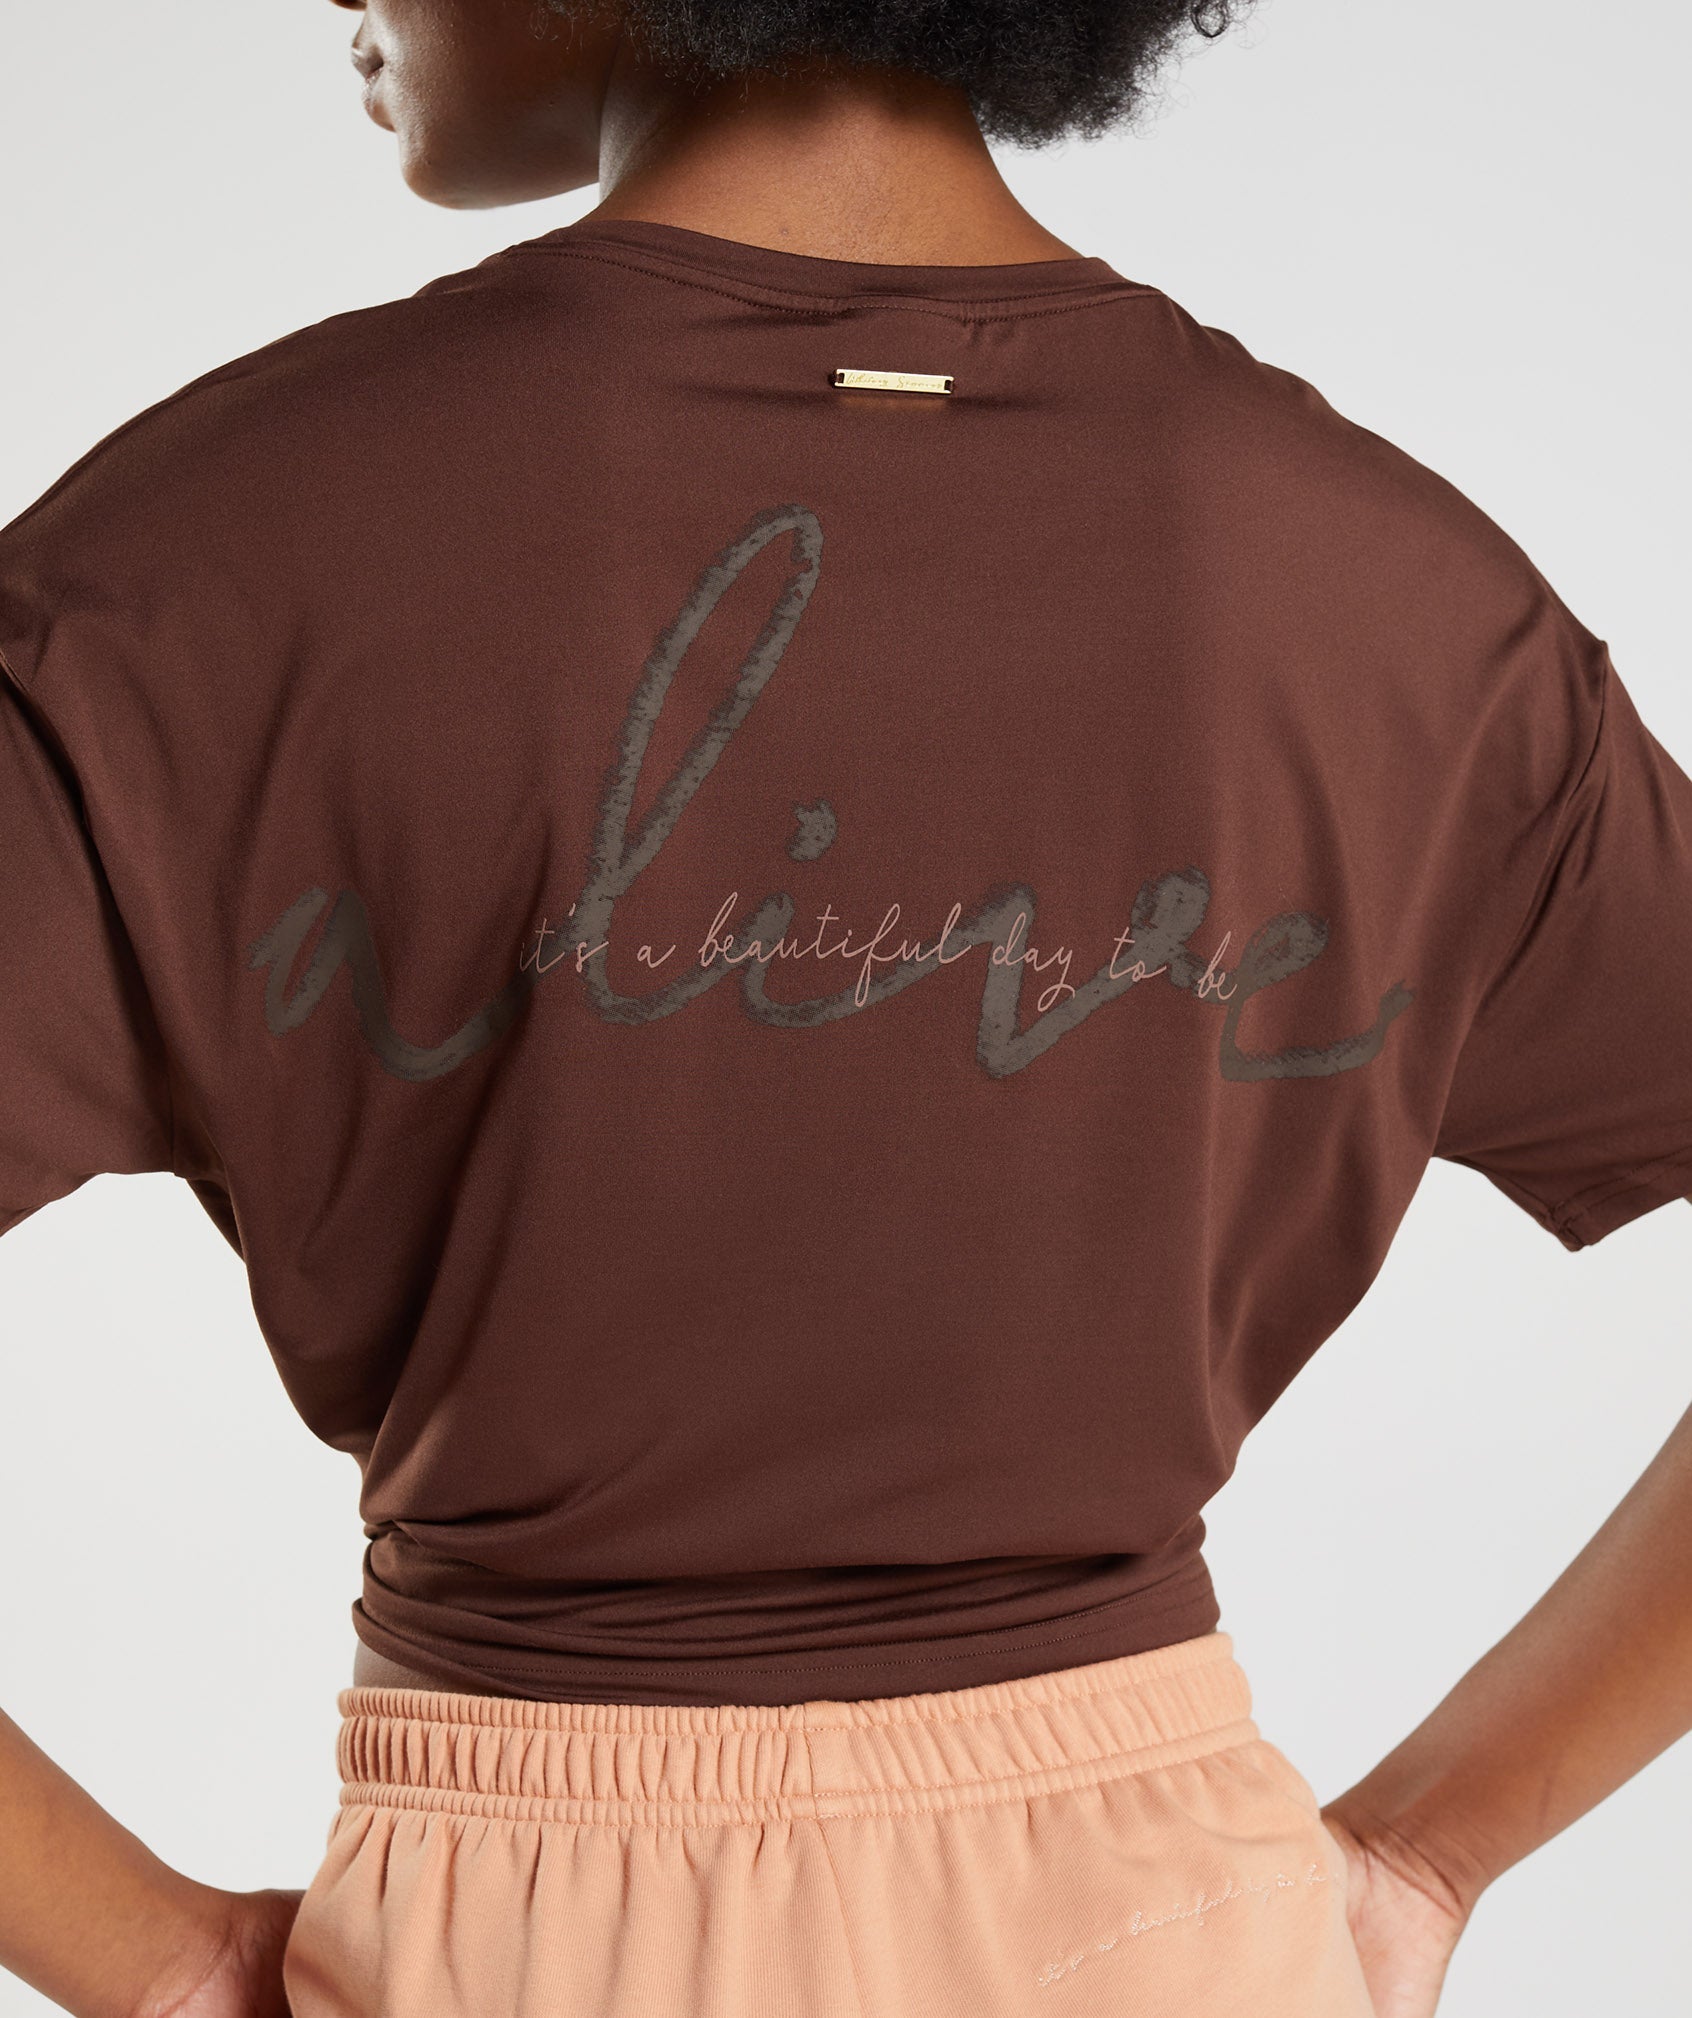 Whitney Oversized T-Shirt in Rekindle Brown - view 6